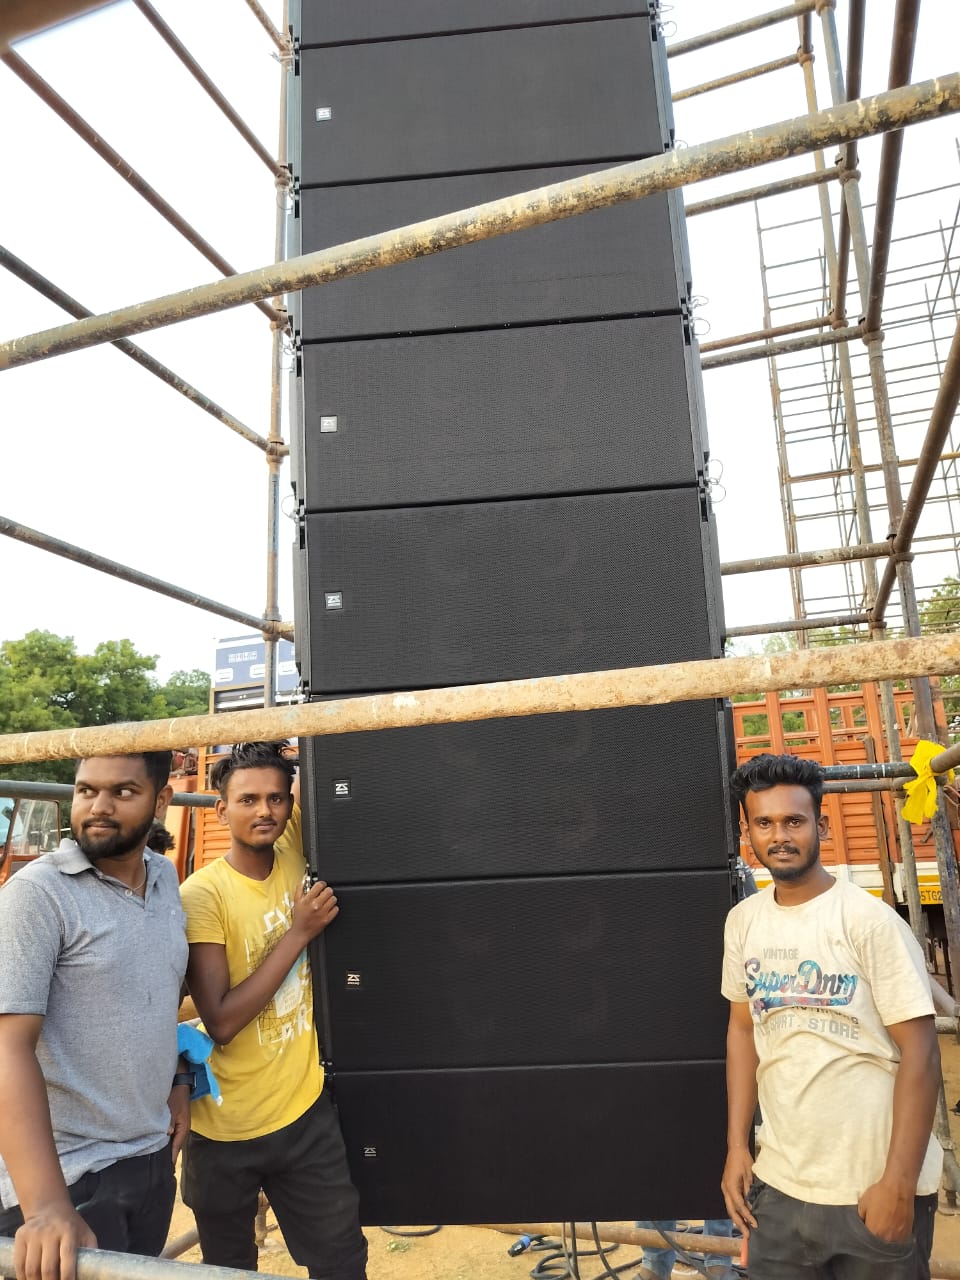 ZSOUND's VCX sound system made its mark at a film event in India.